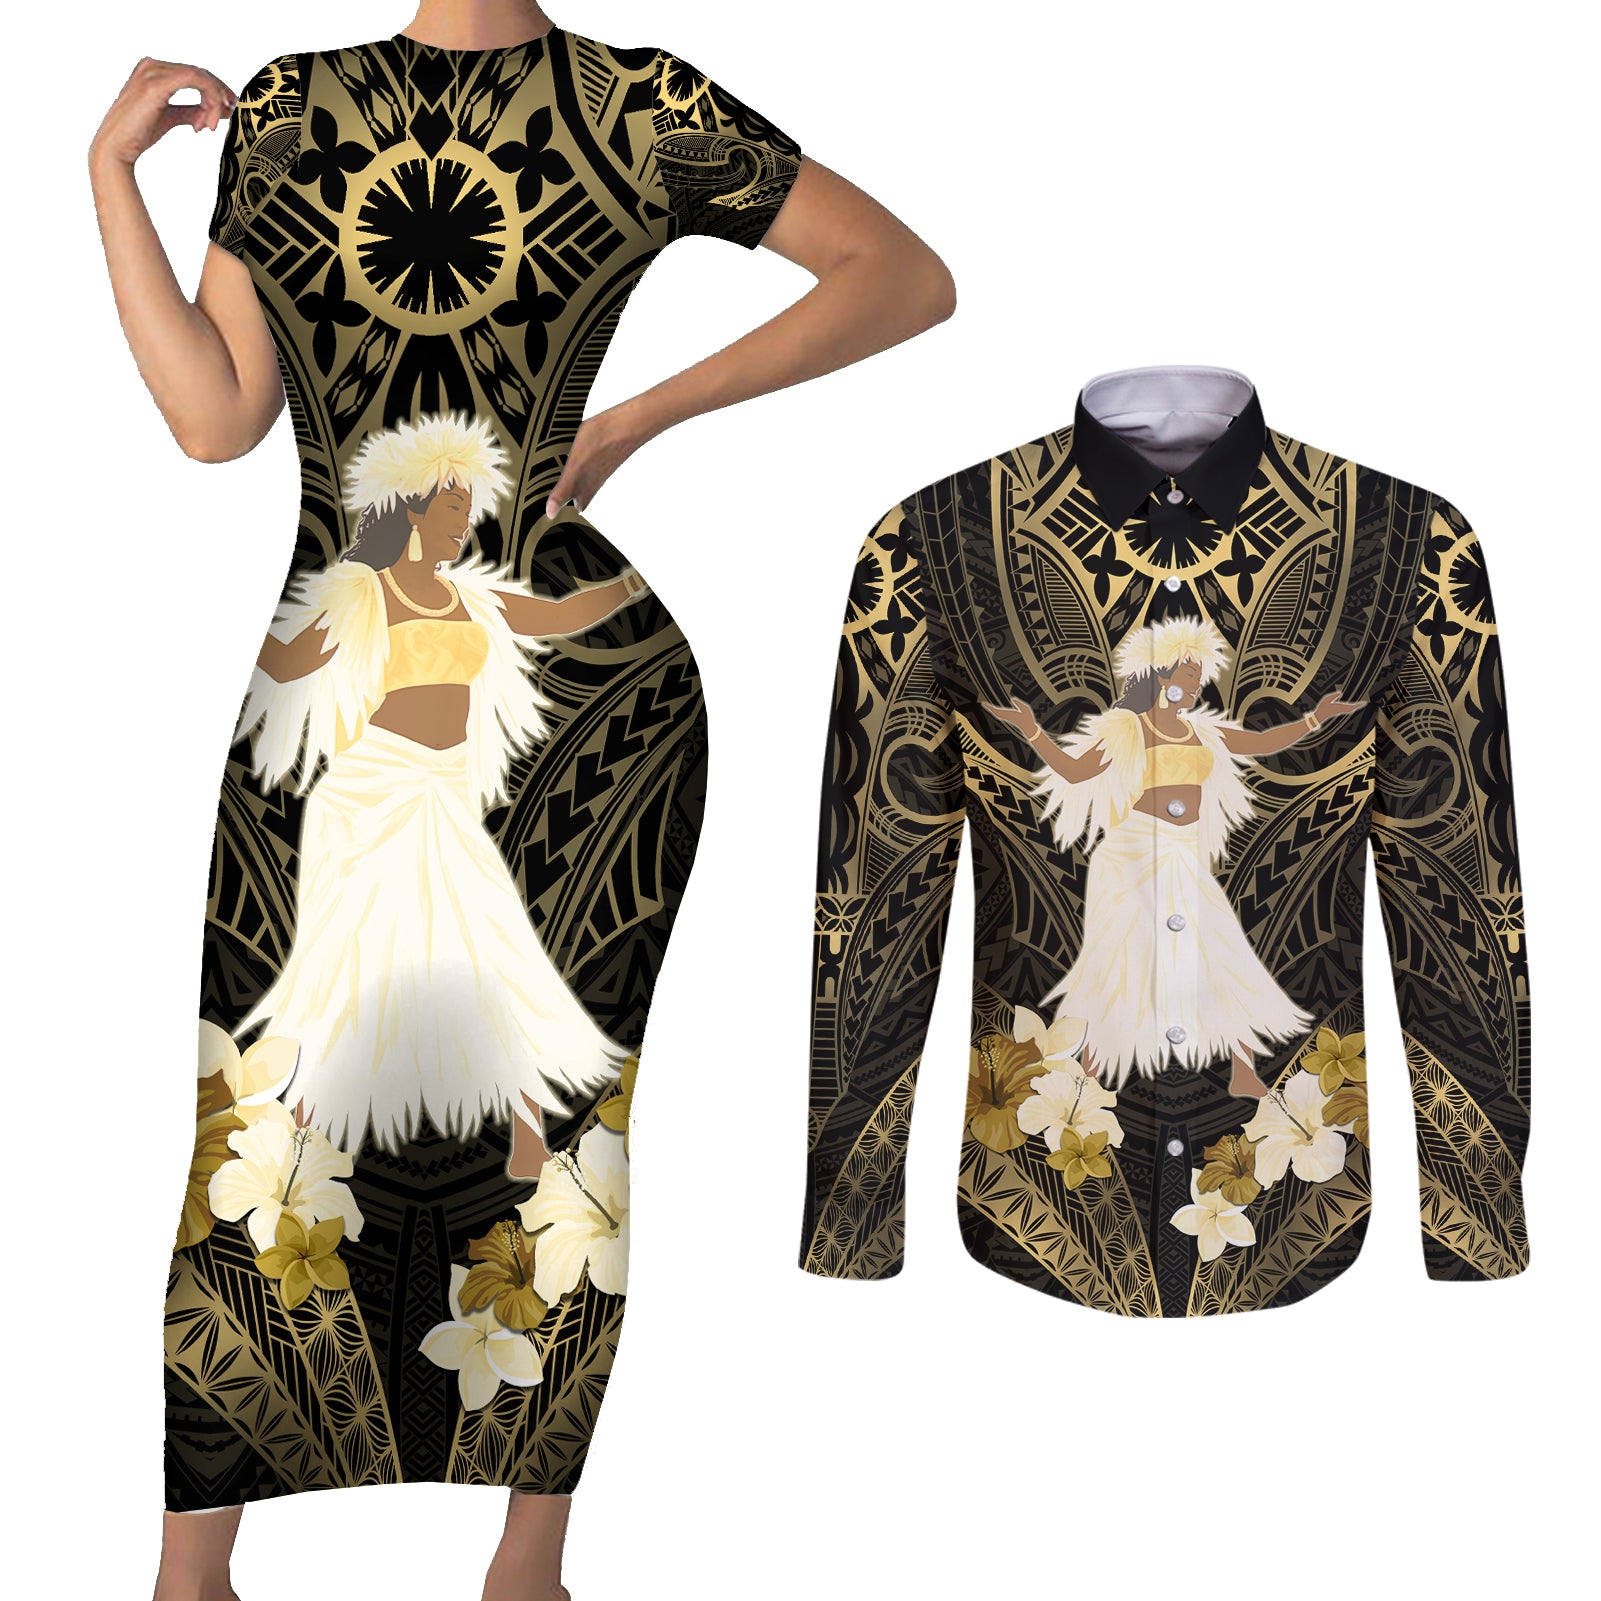 Niue Women's Day Couples Matching Short Sleeve Bodycon Dress and Long Sleeve Button Shirt With Polynesian Pattern LT05 Gold - Polynesian Pride